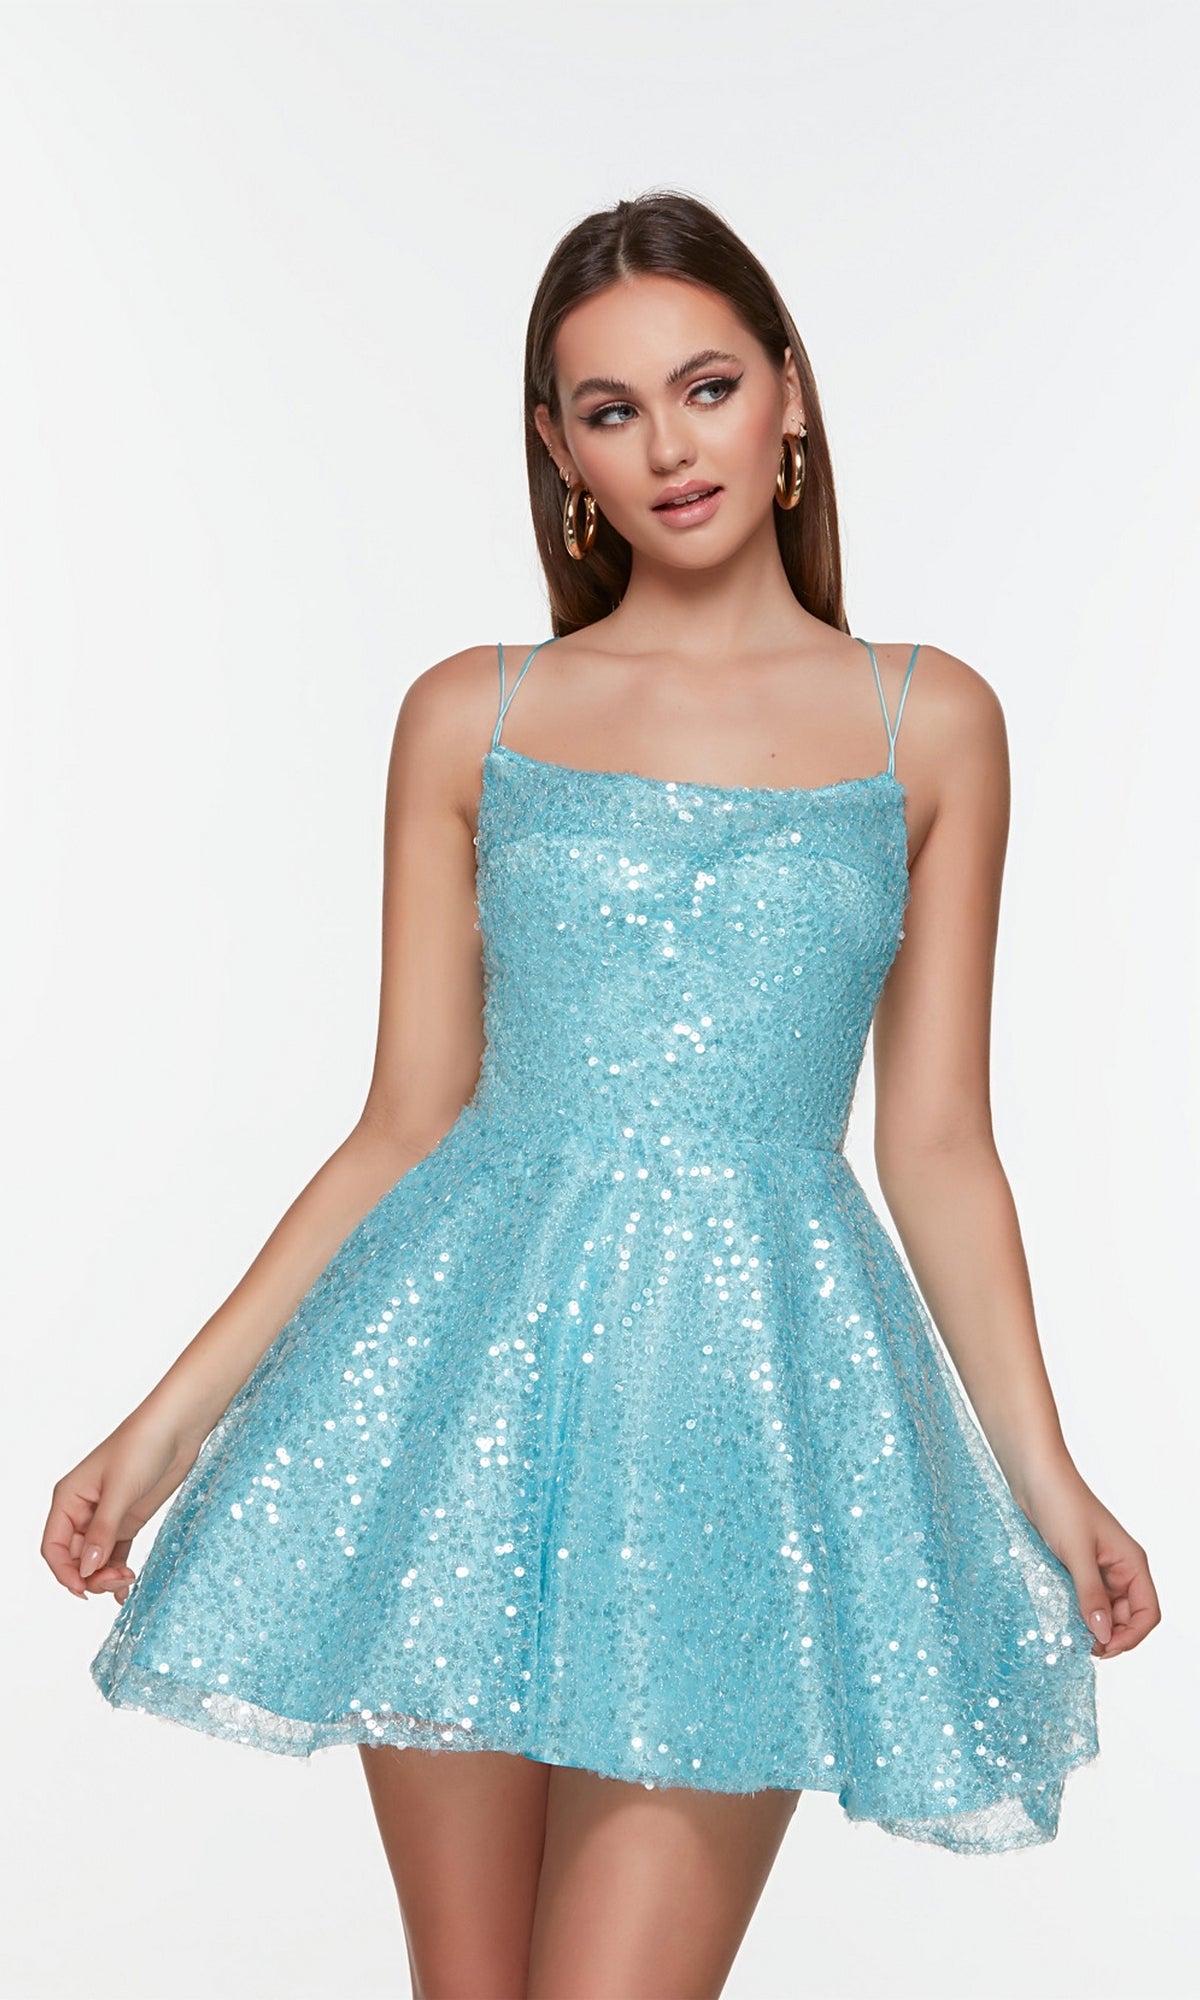 Blue Sequin Baby Doll Short Homecoming Dress -PromGirl